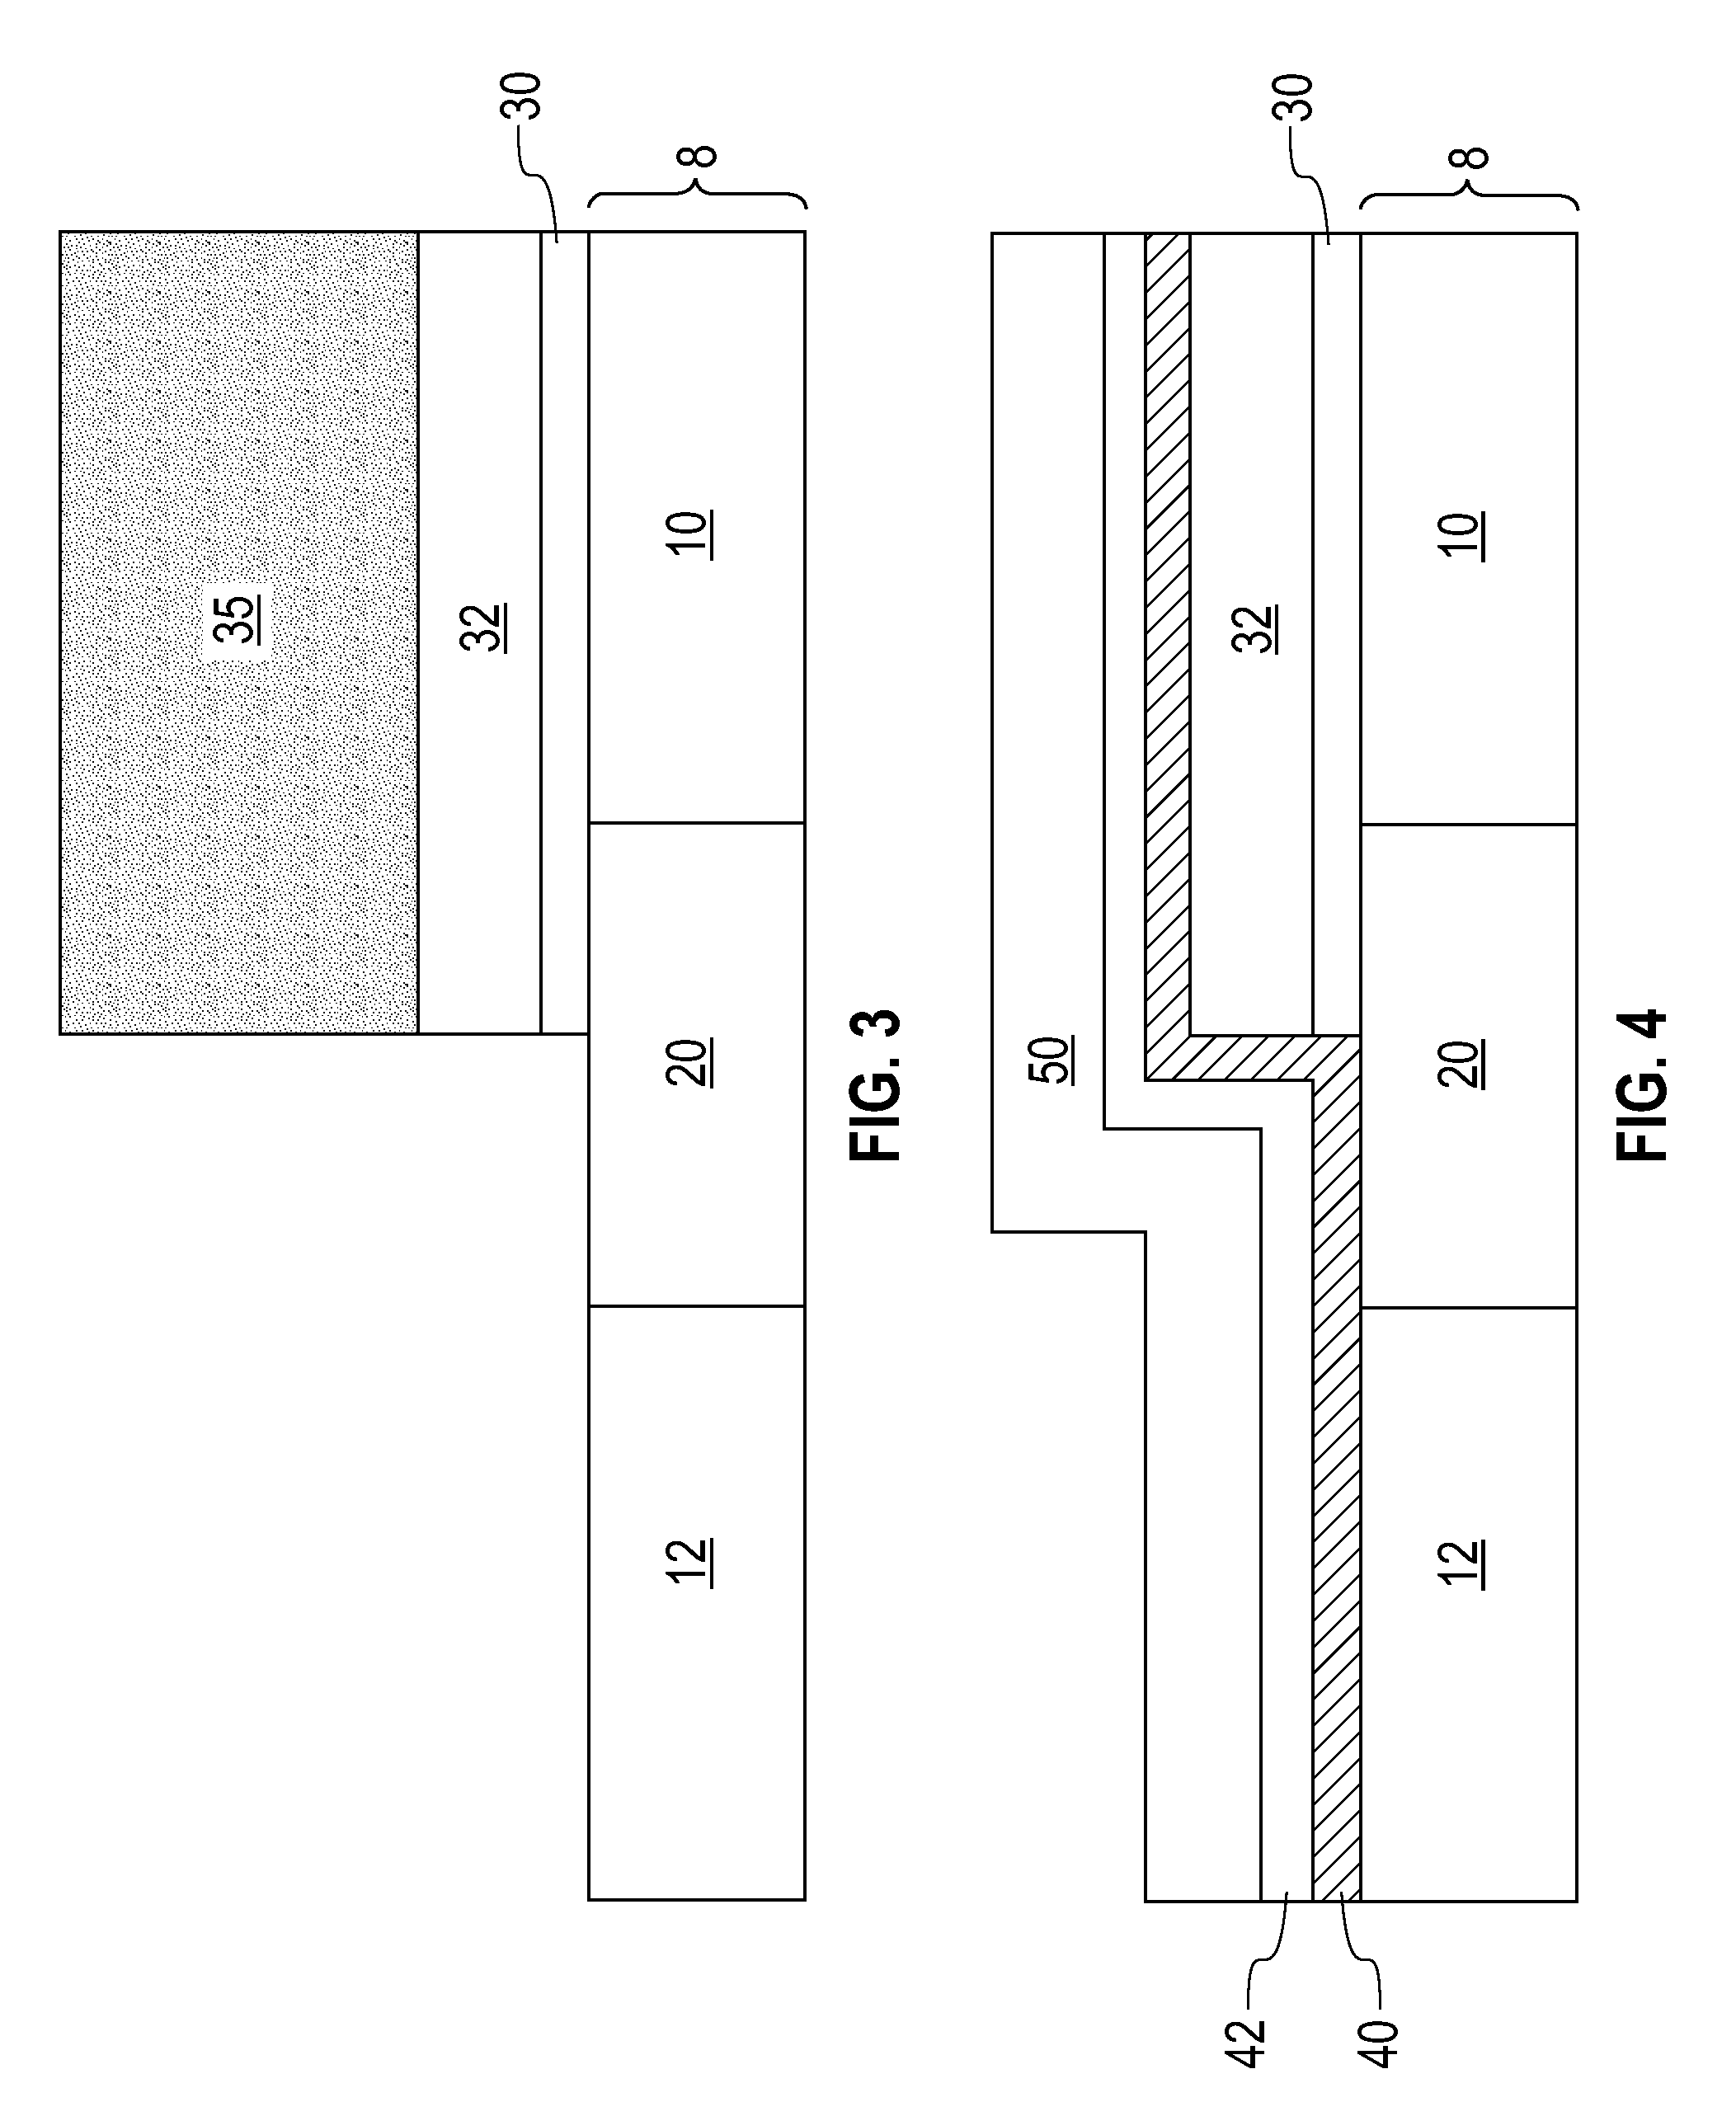 Integration schemes for fabricating polysilicon gate MOSFET and high-K dielectric metal gate MOSFET